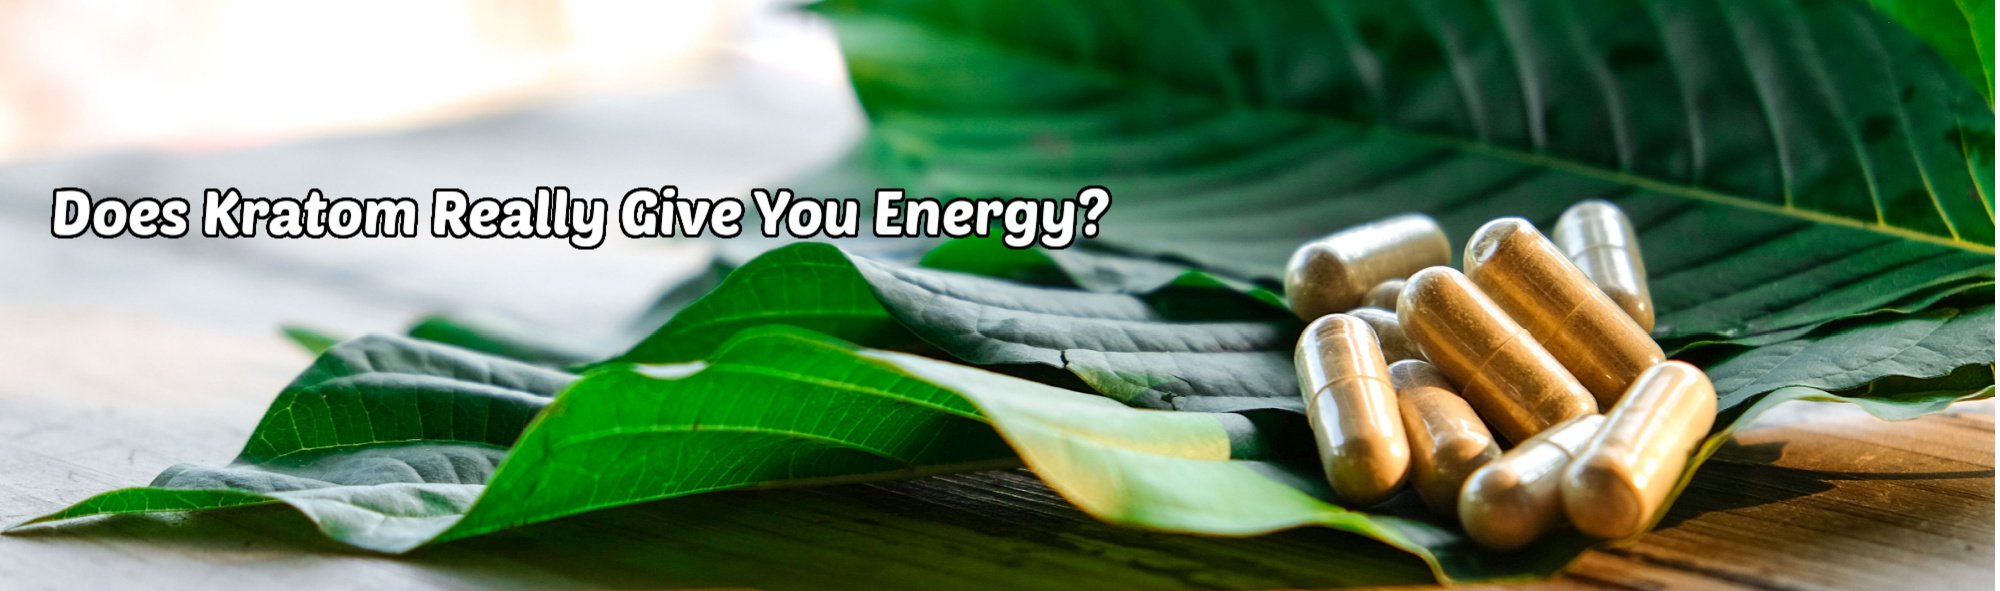 image of does kratom really give you energy